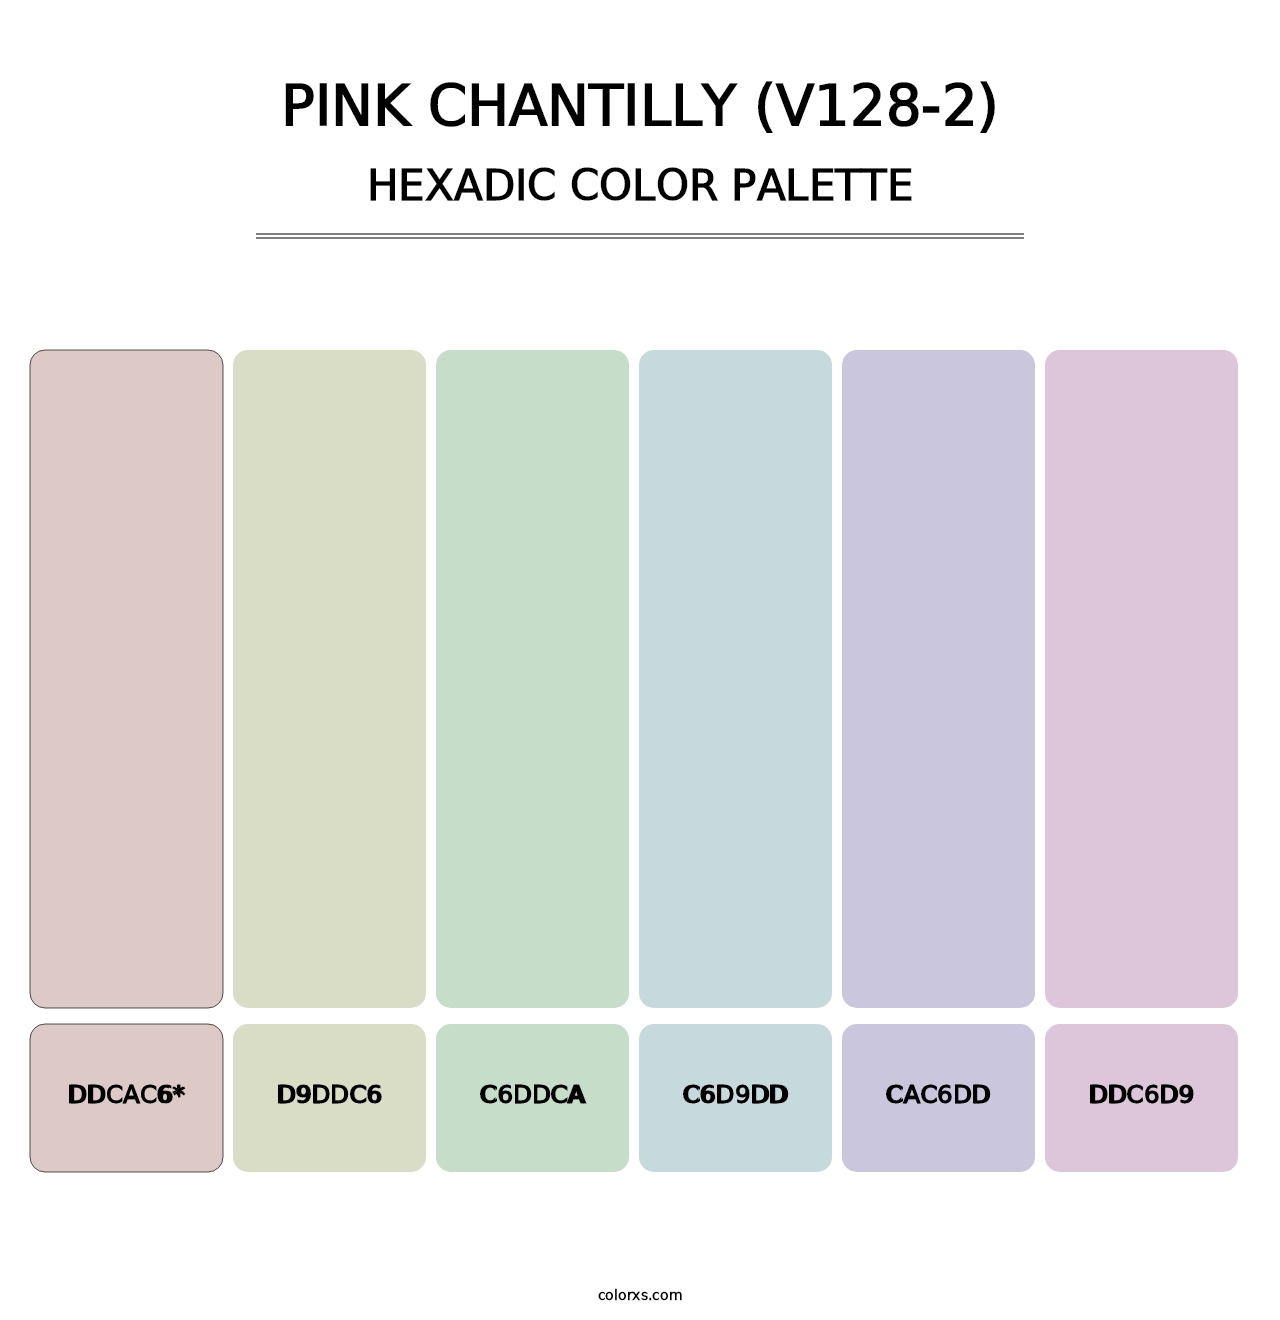 Pink Chantilly (V128-2) - Hexadic Color Palette